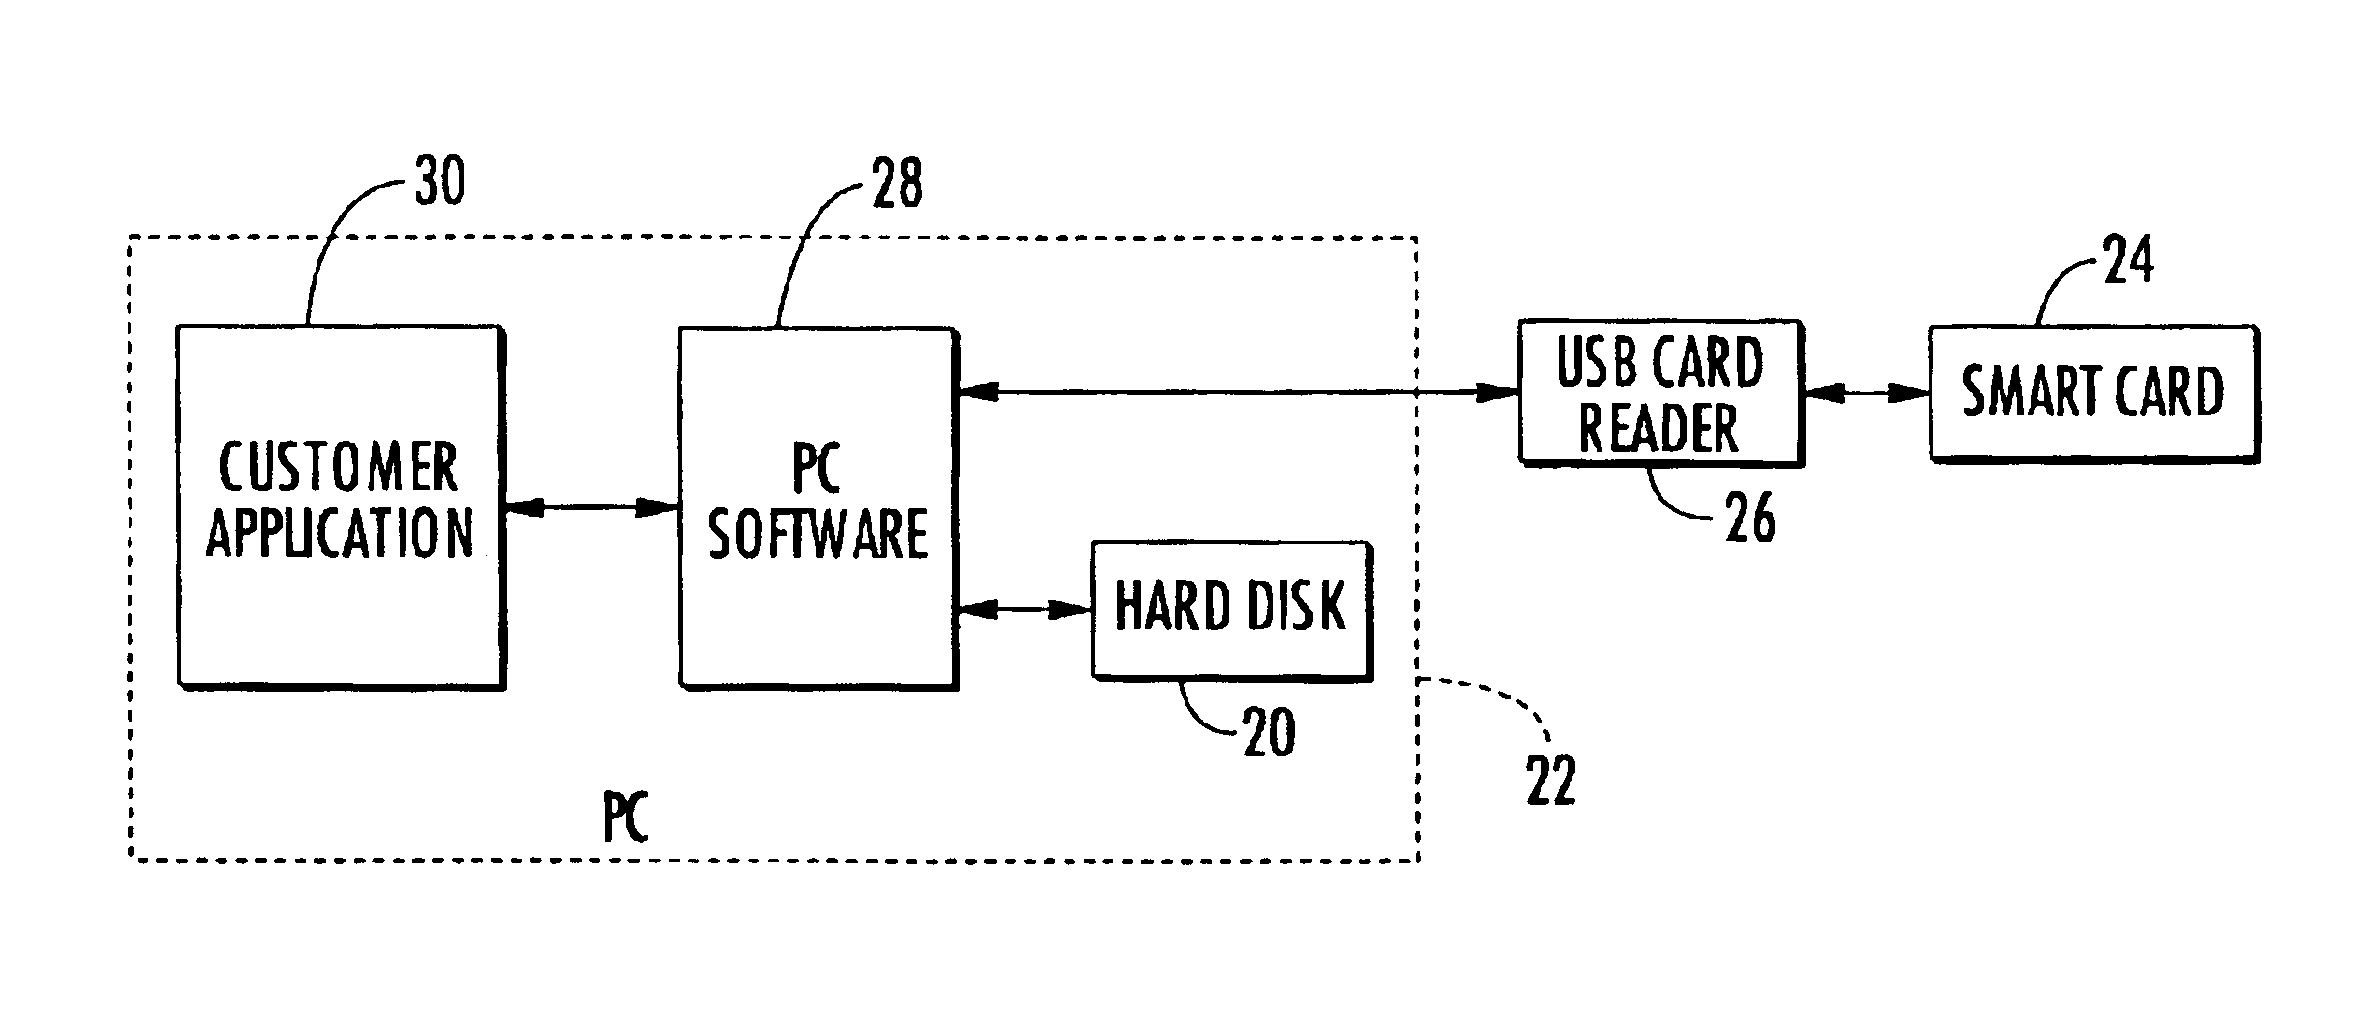 Smart card device used as mass storage device